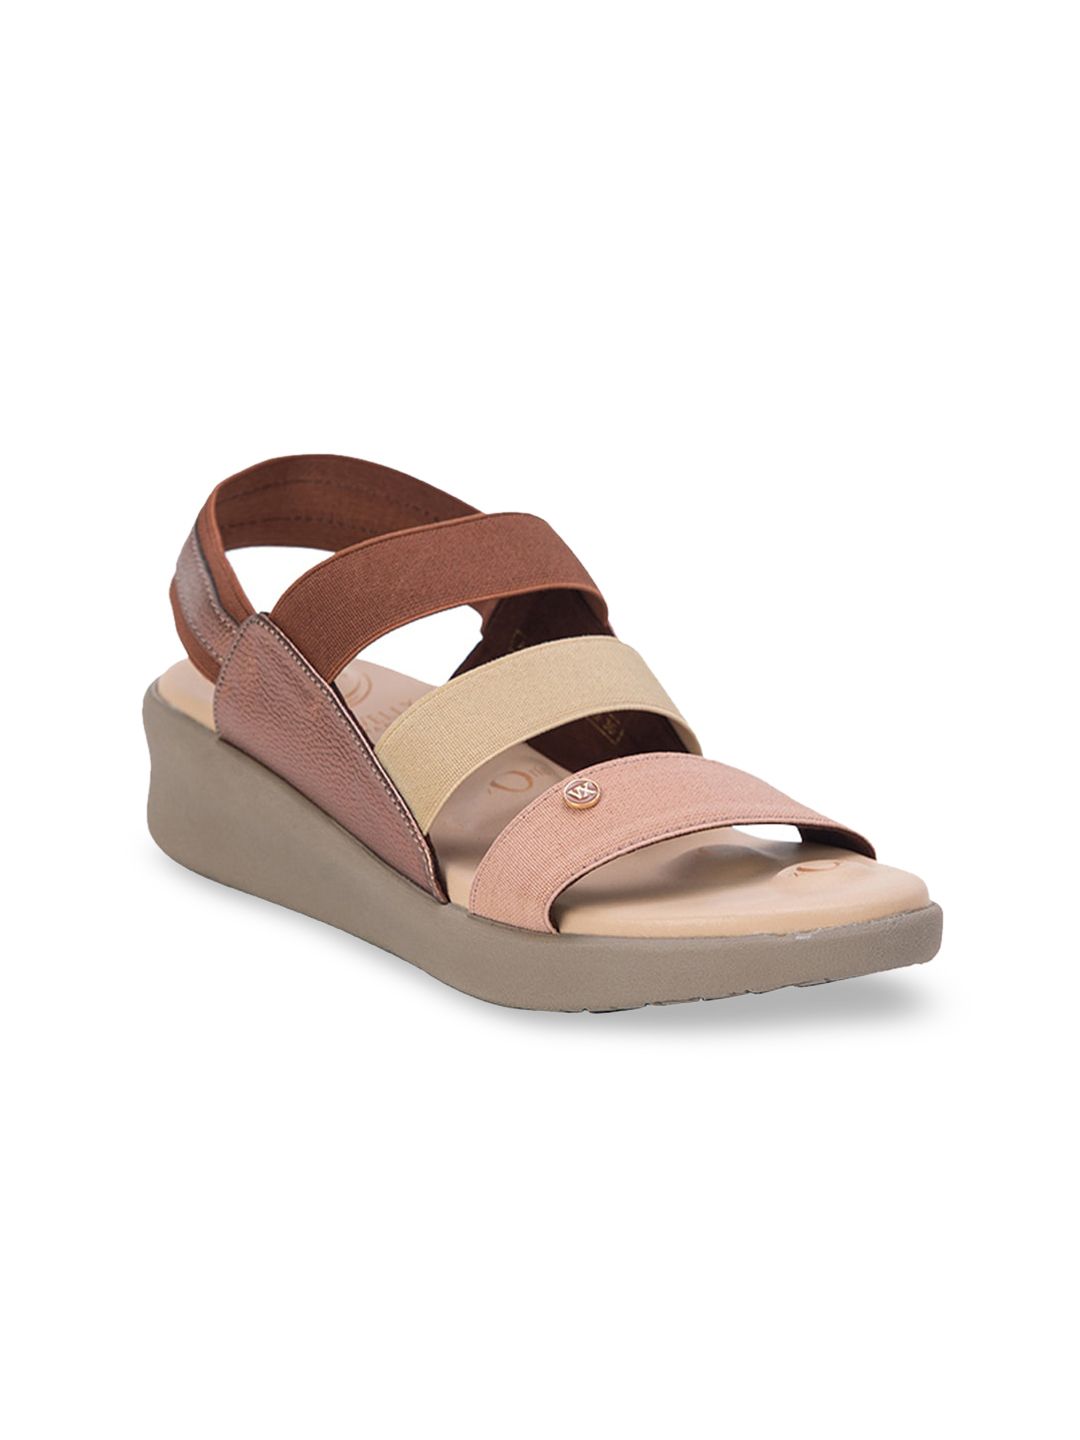 VON WELLX GERMANY Brown Colourblocked Wedge Sandals Price in India